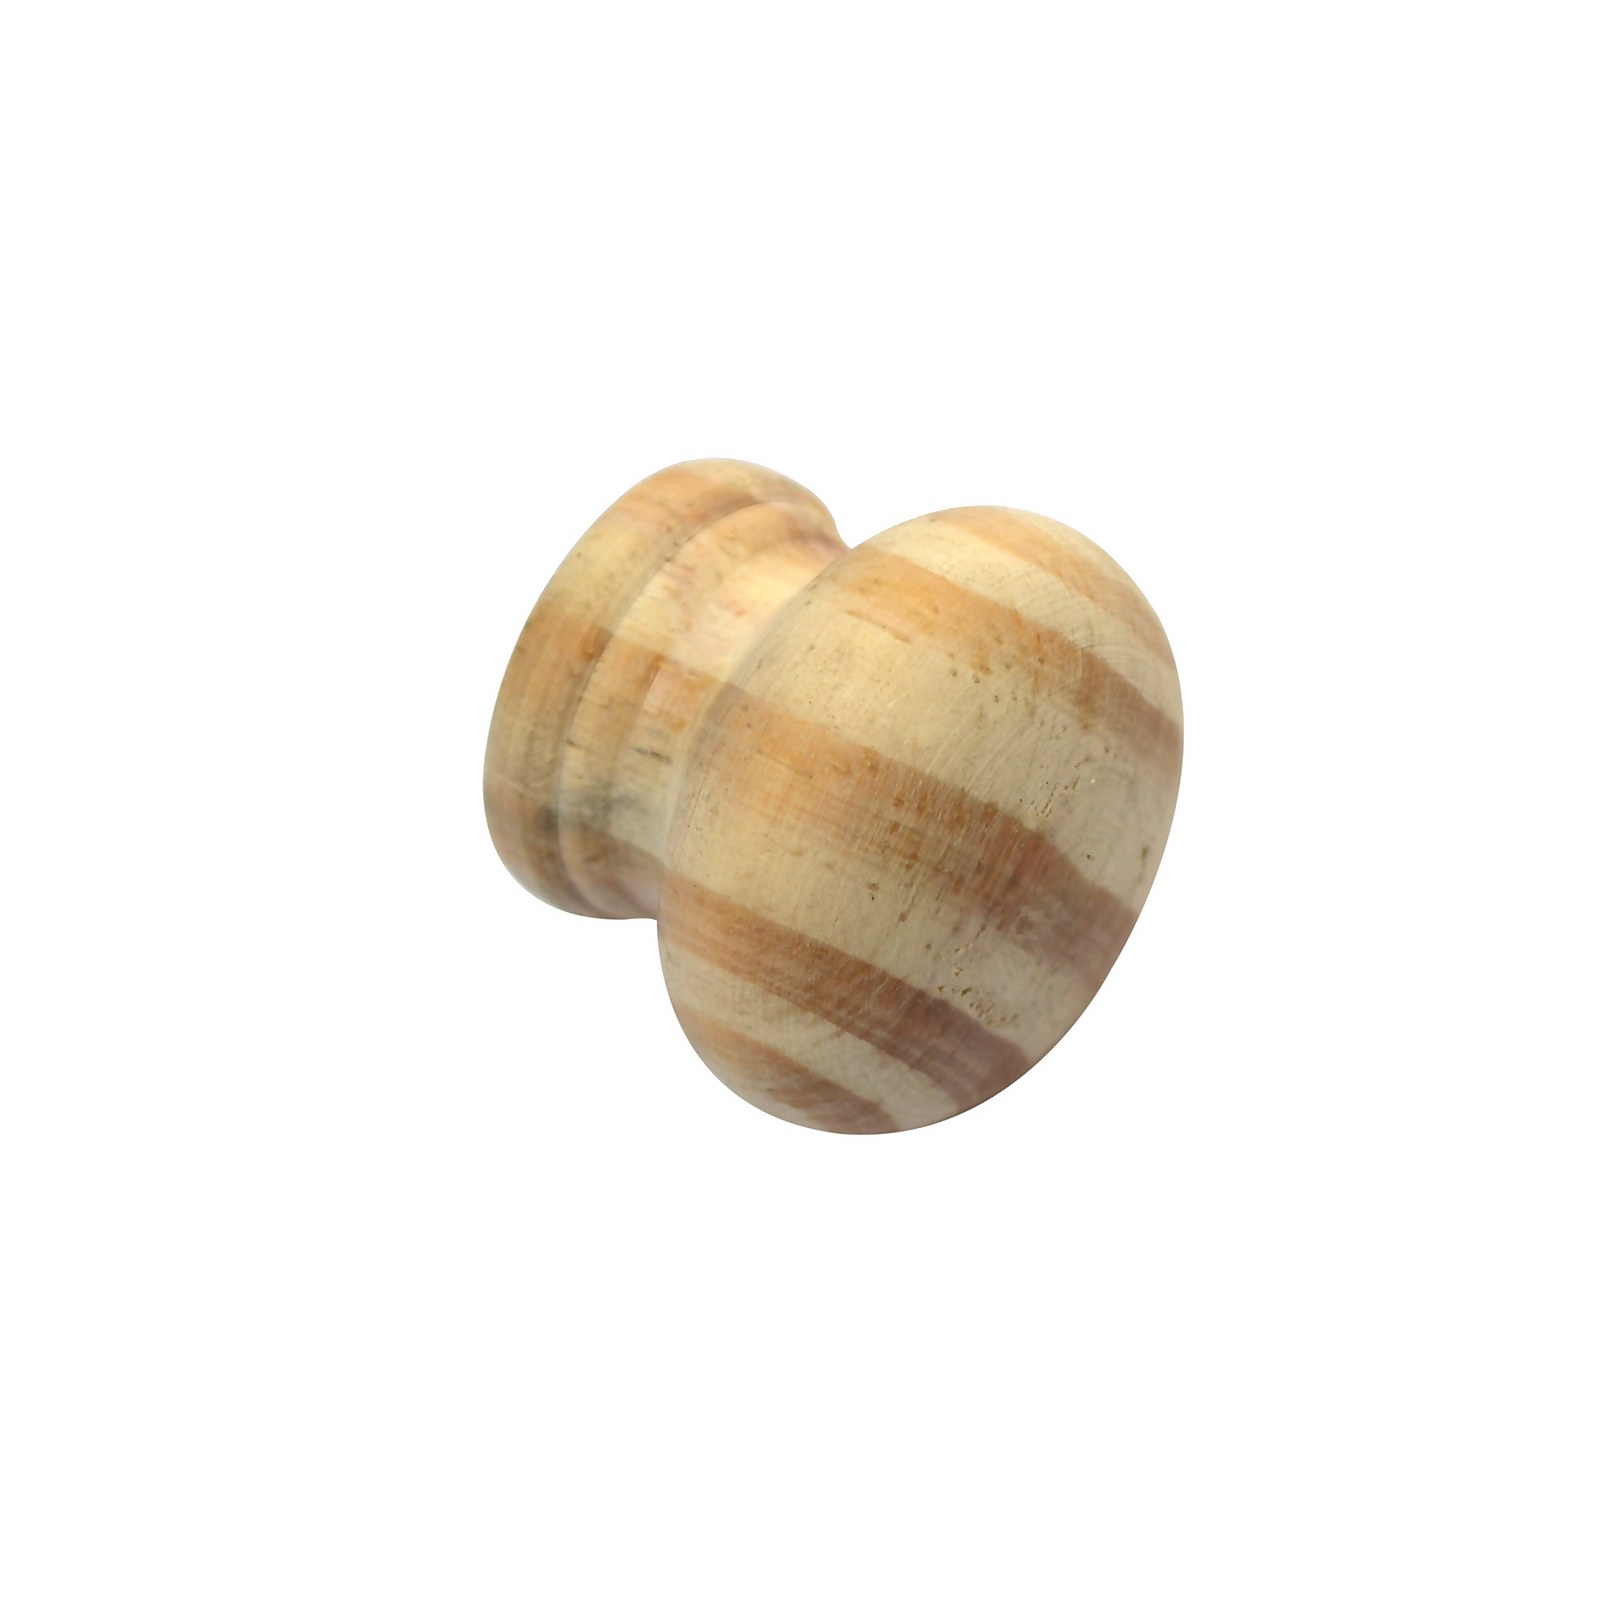 Photo of Pine 128mm Wooden Natural Cabinet Knob - 2 Pack